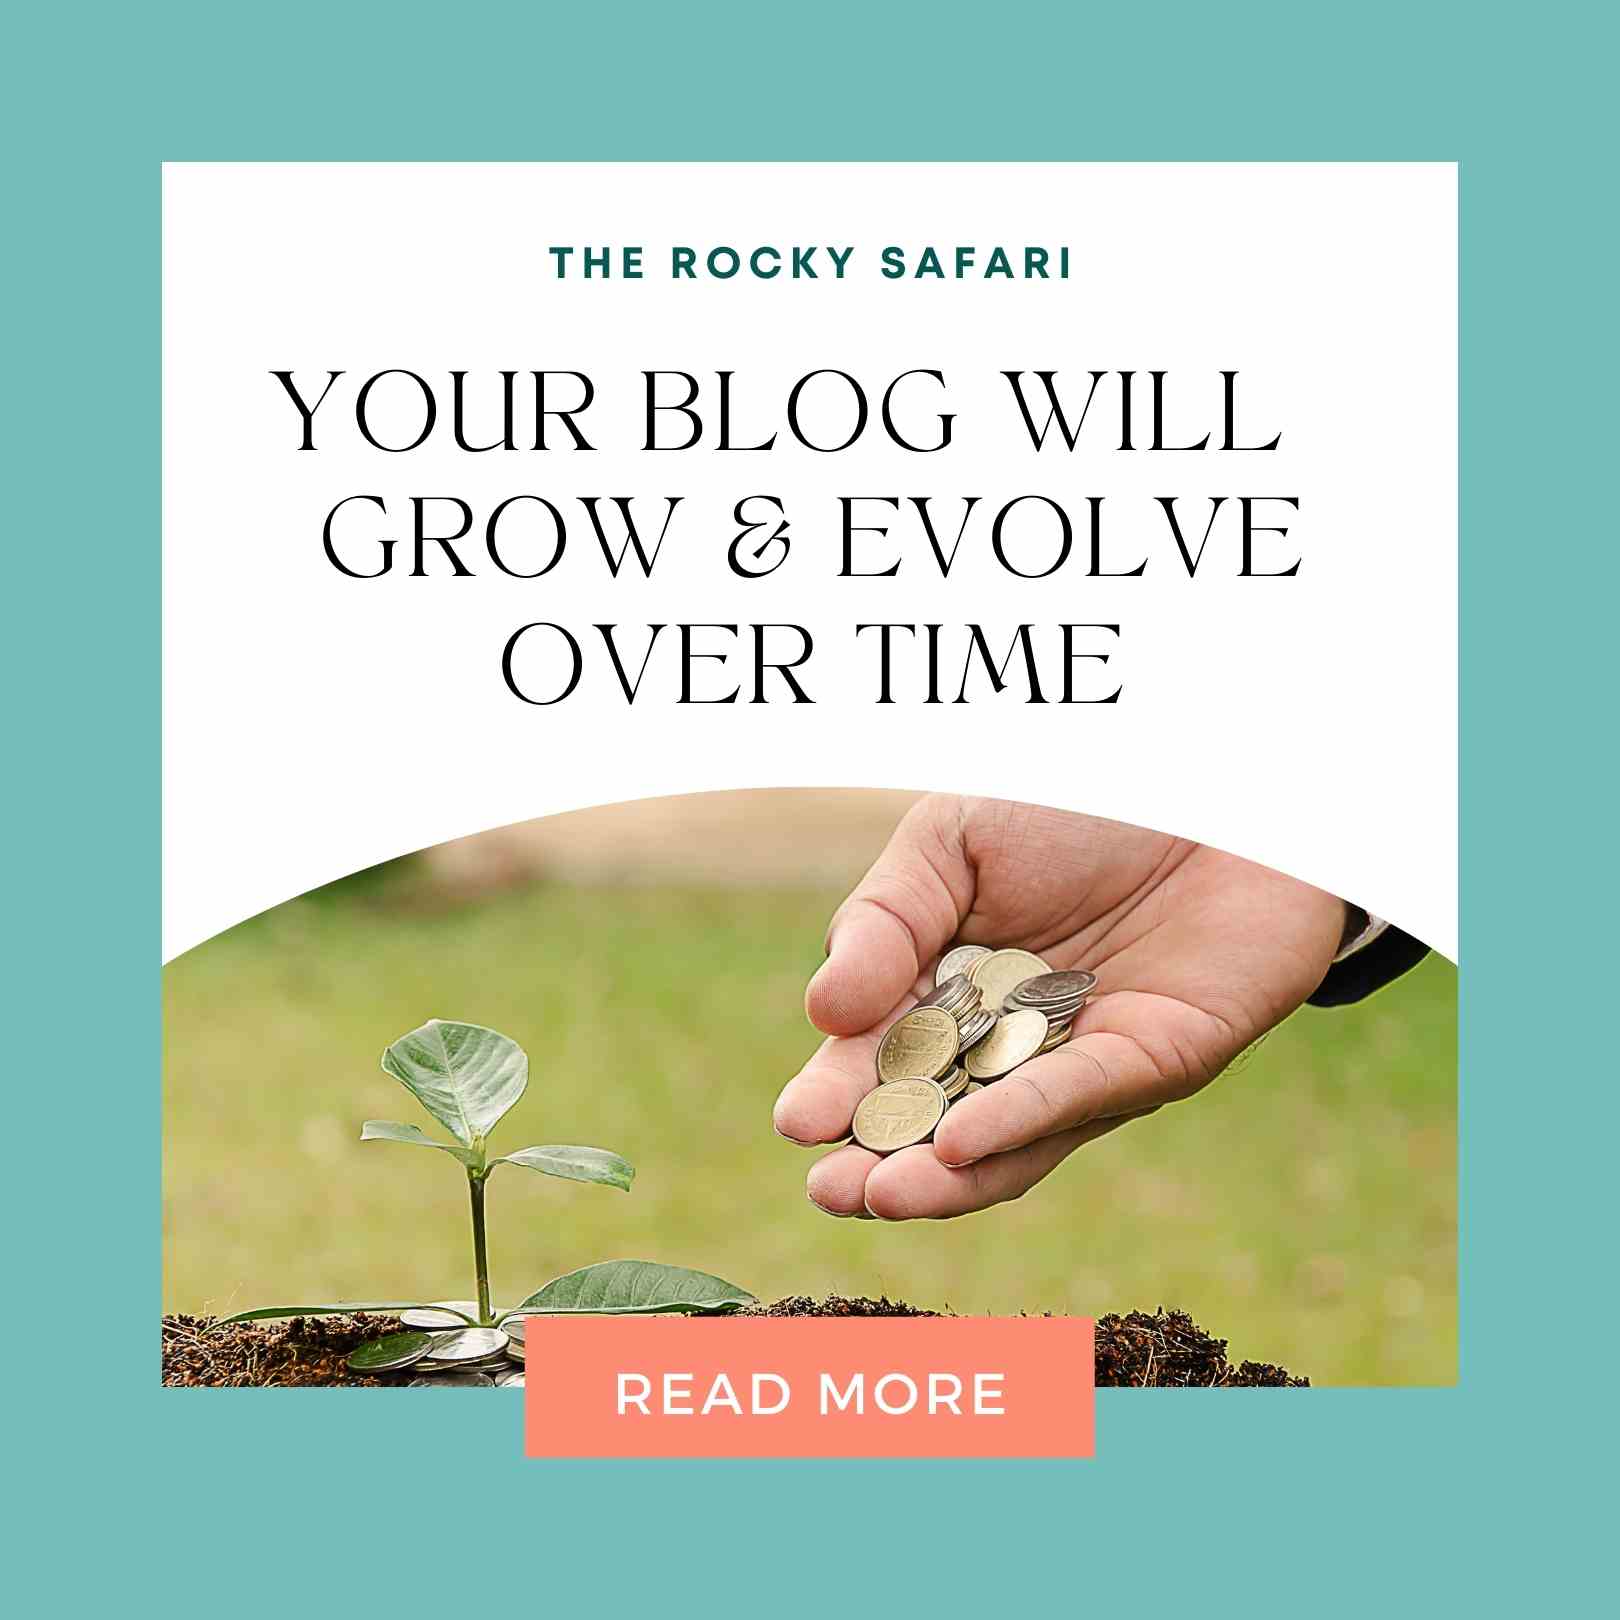 YOUR BLOG WILL GROW & EVOLVE OVER TIME